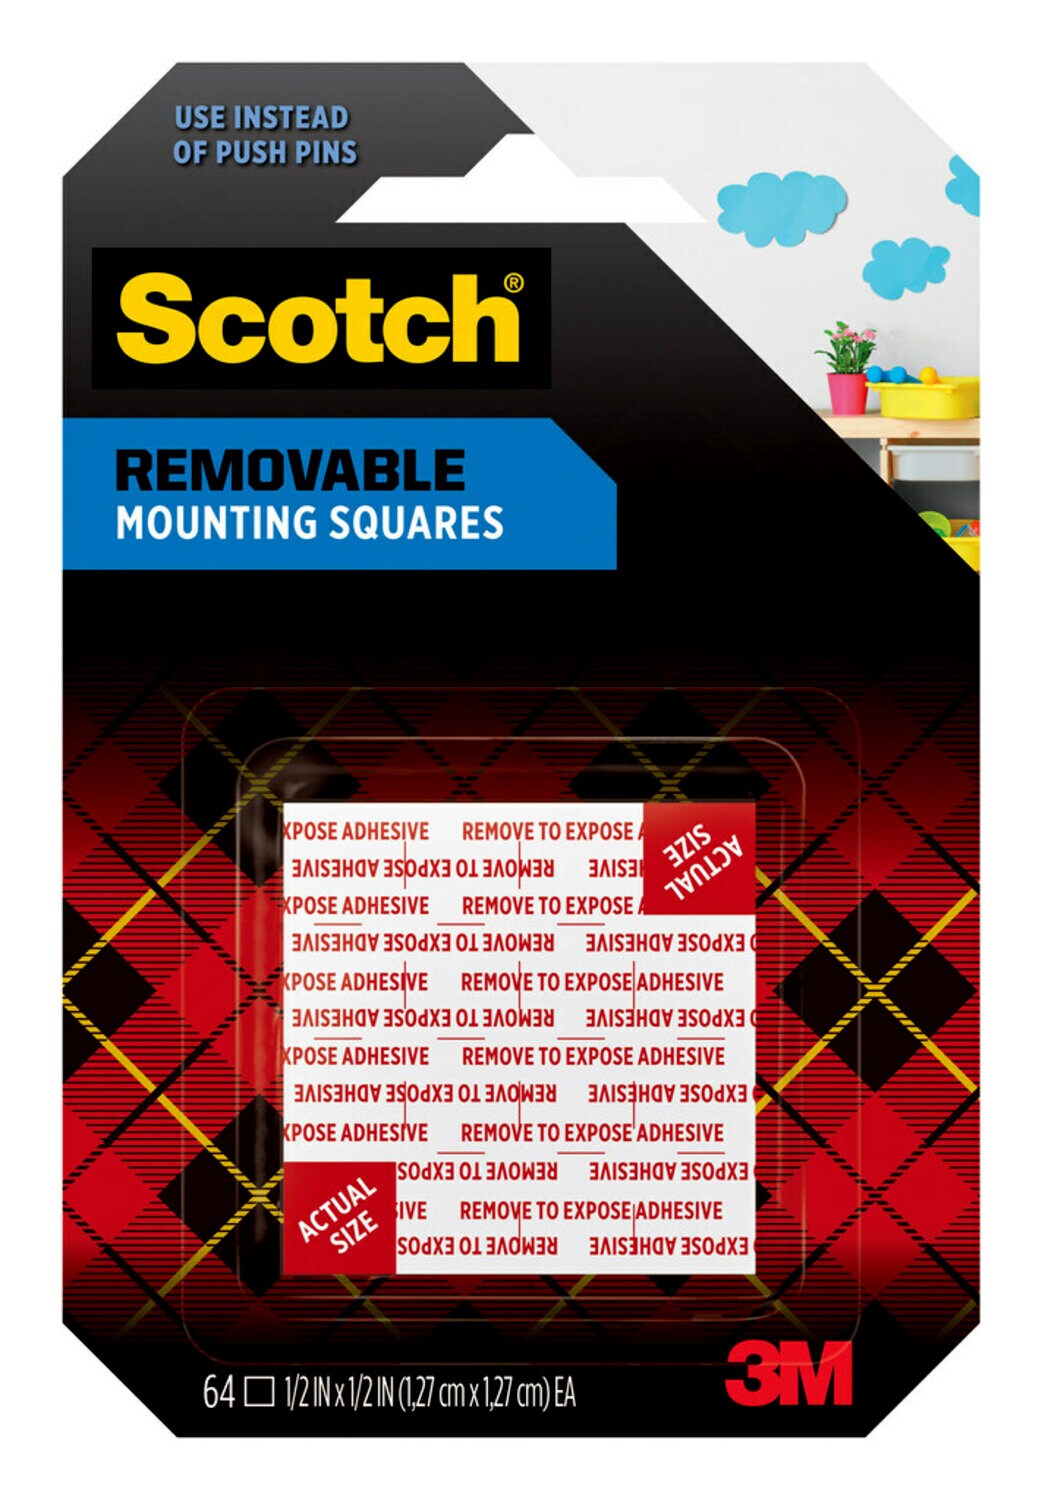 7100245431 - Scotch Removable Double-Sided Mounting Squares 108S-SQSML-64, 1/2 in x 1/2 in (1.27 cm x 1.27 cm) 64/pk